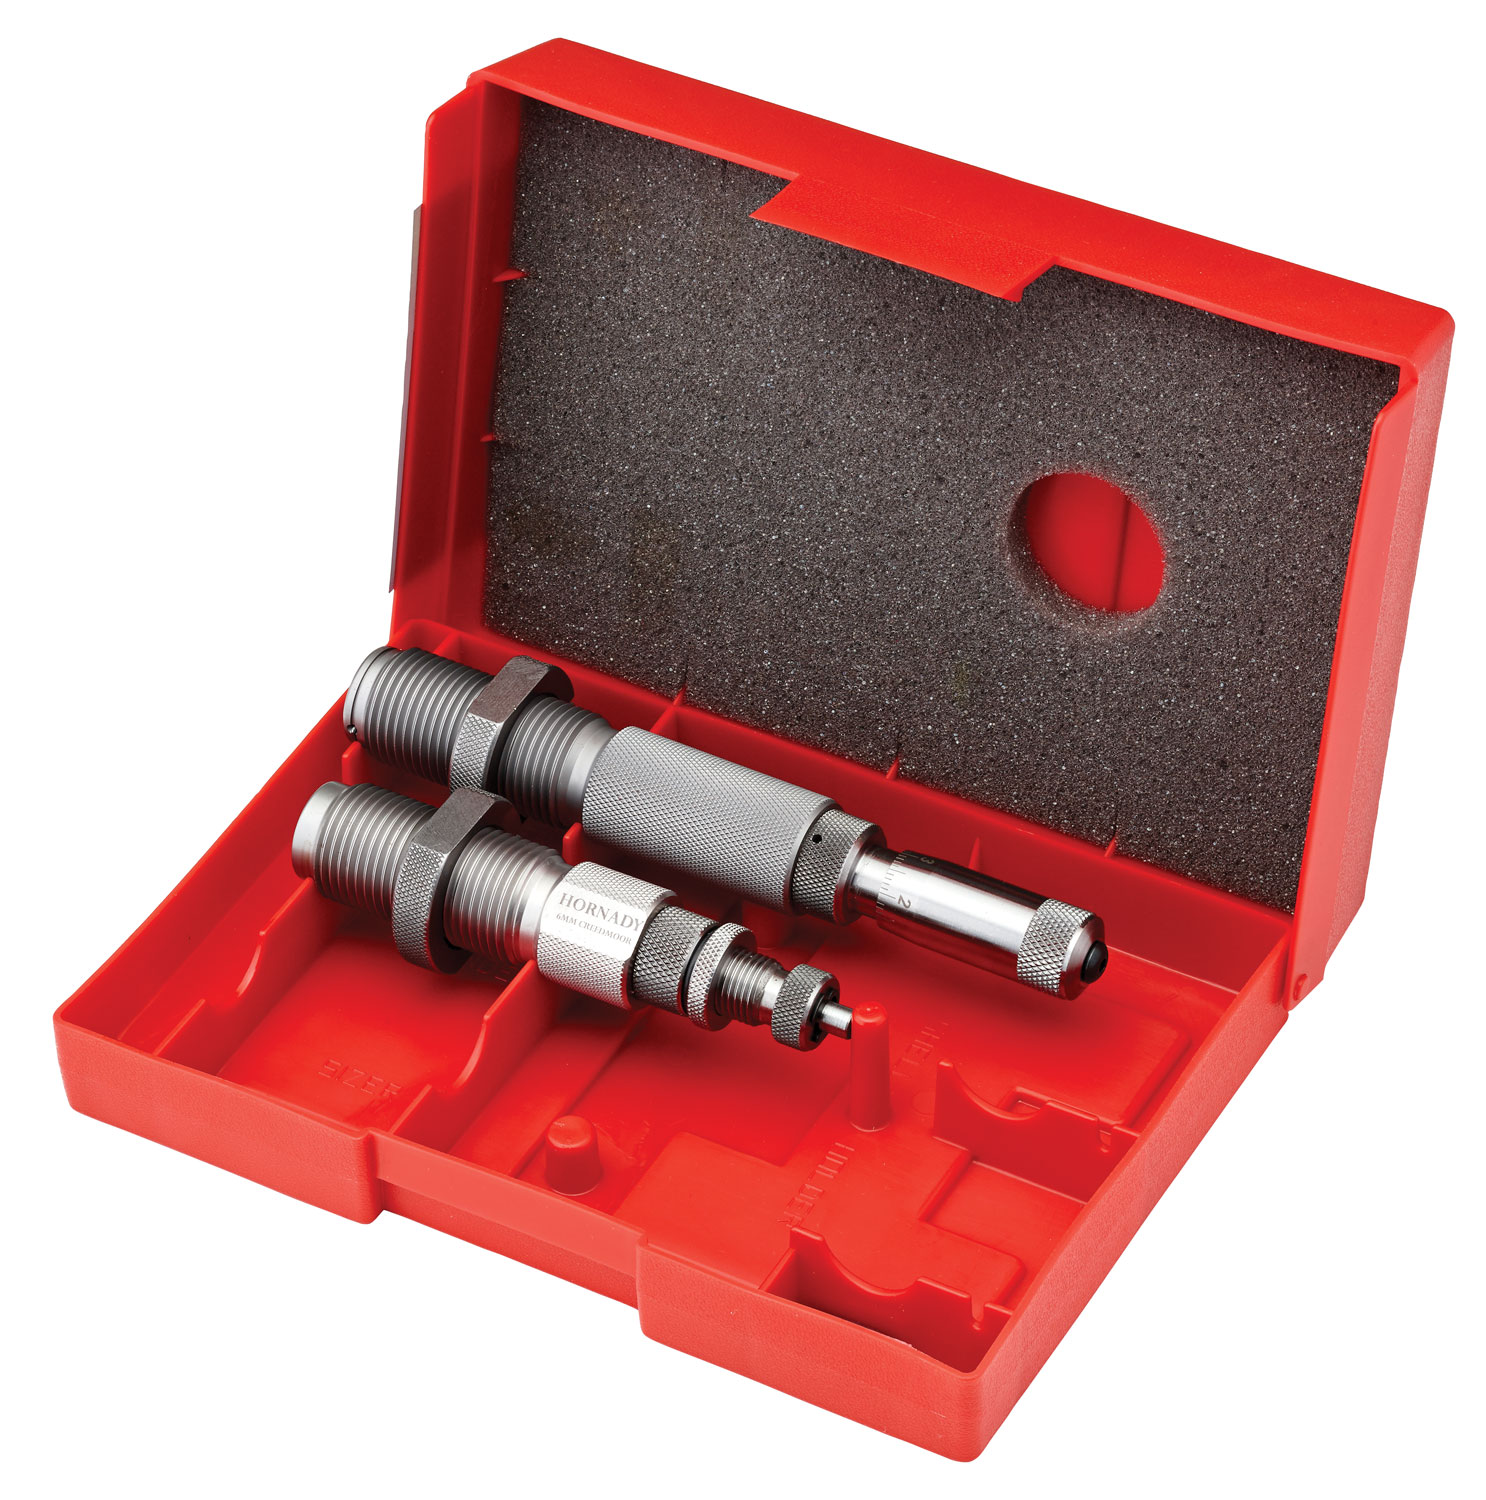 Hornady 544355 Match Grade 2 Die Set for 308 Win Includes Bushing/Seater